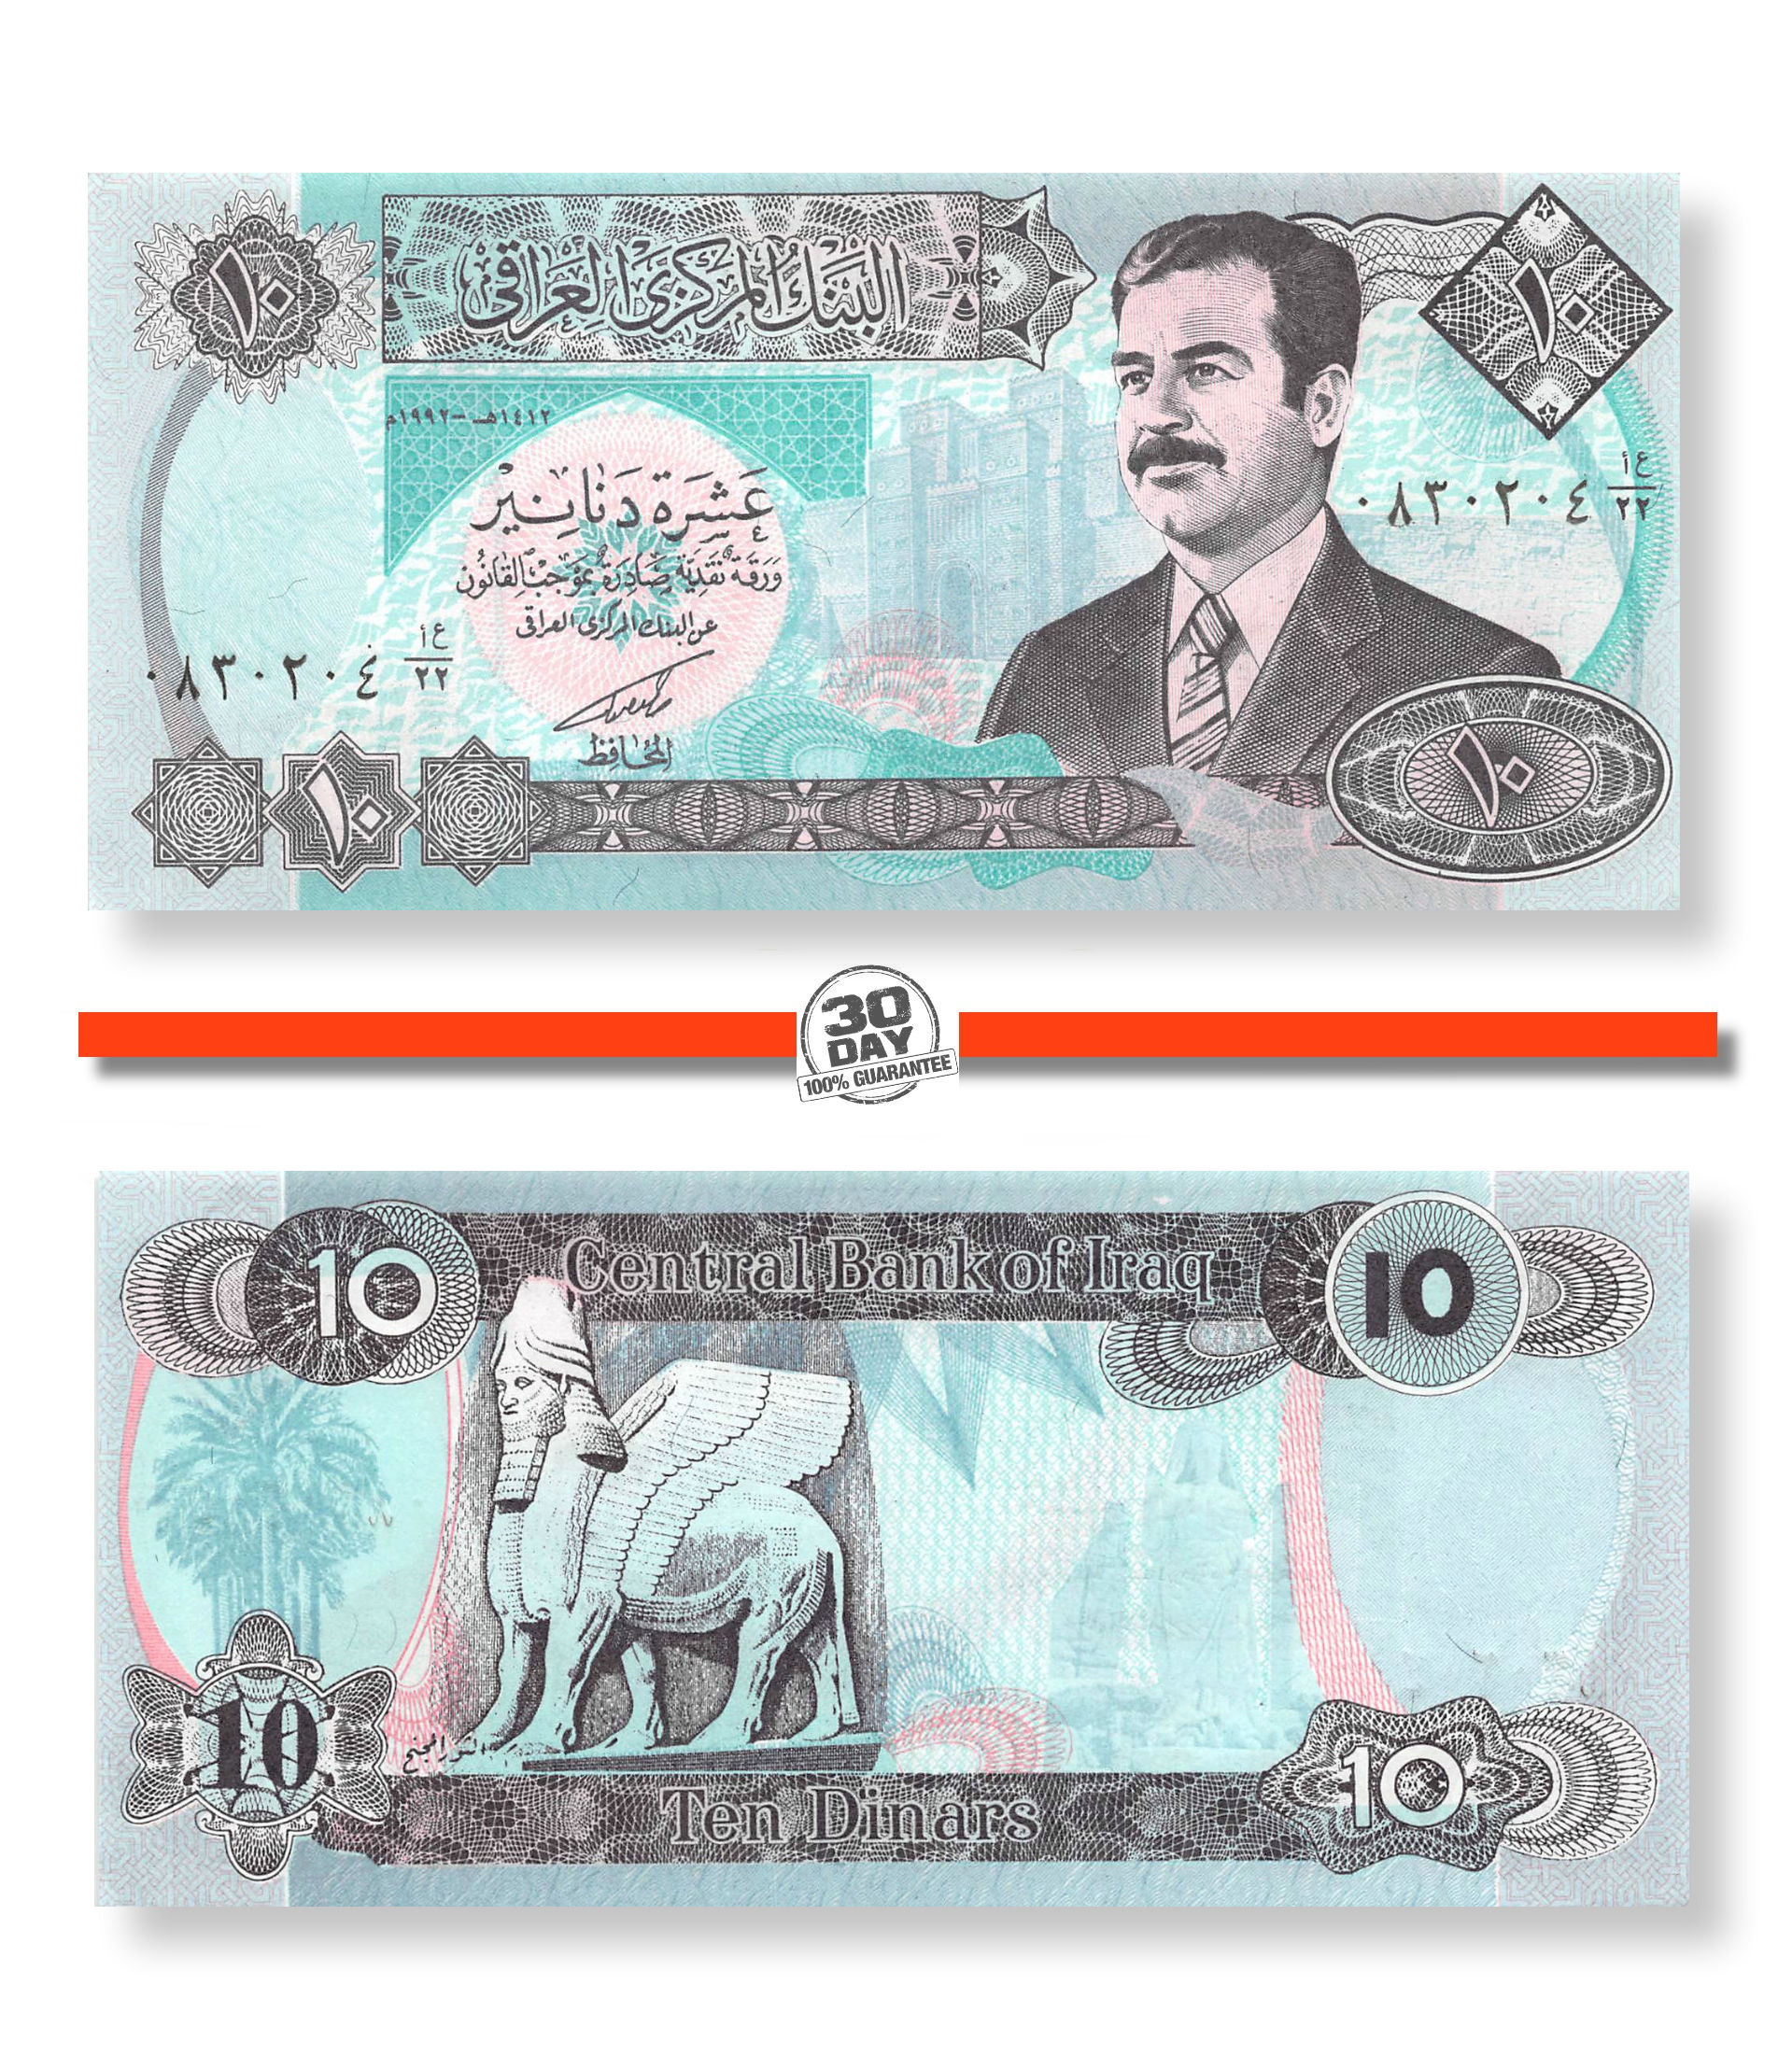 Central Bank of Iraq-Saddam Hussein Details about   1992 ~ 10 Dinar Note About Uncirculated 